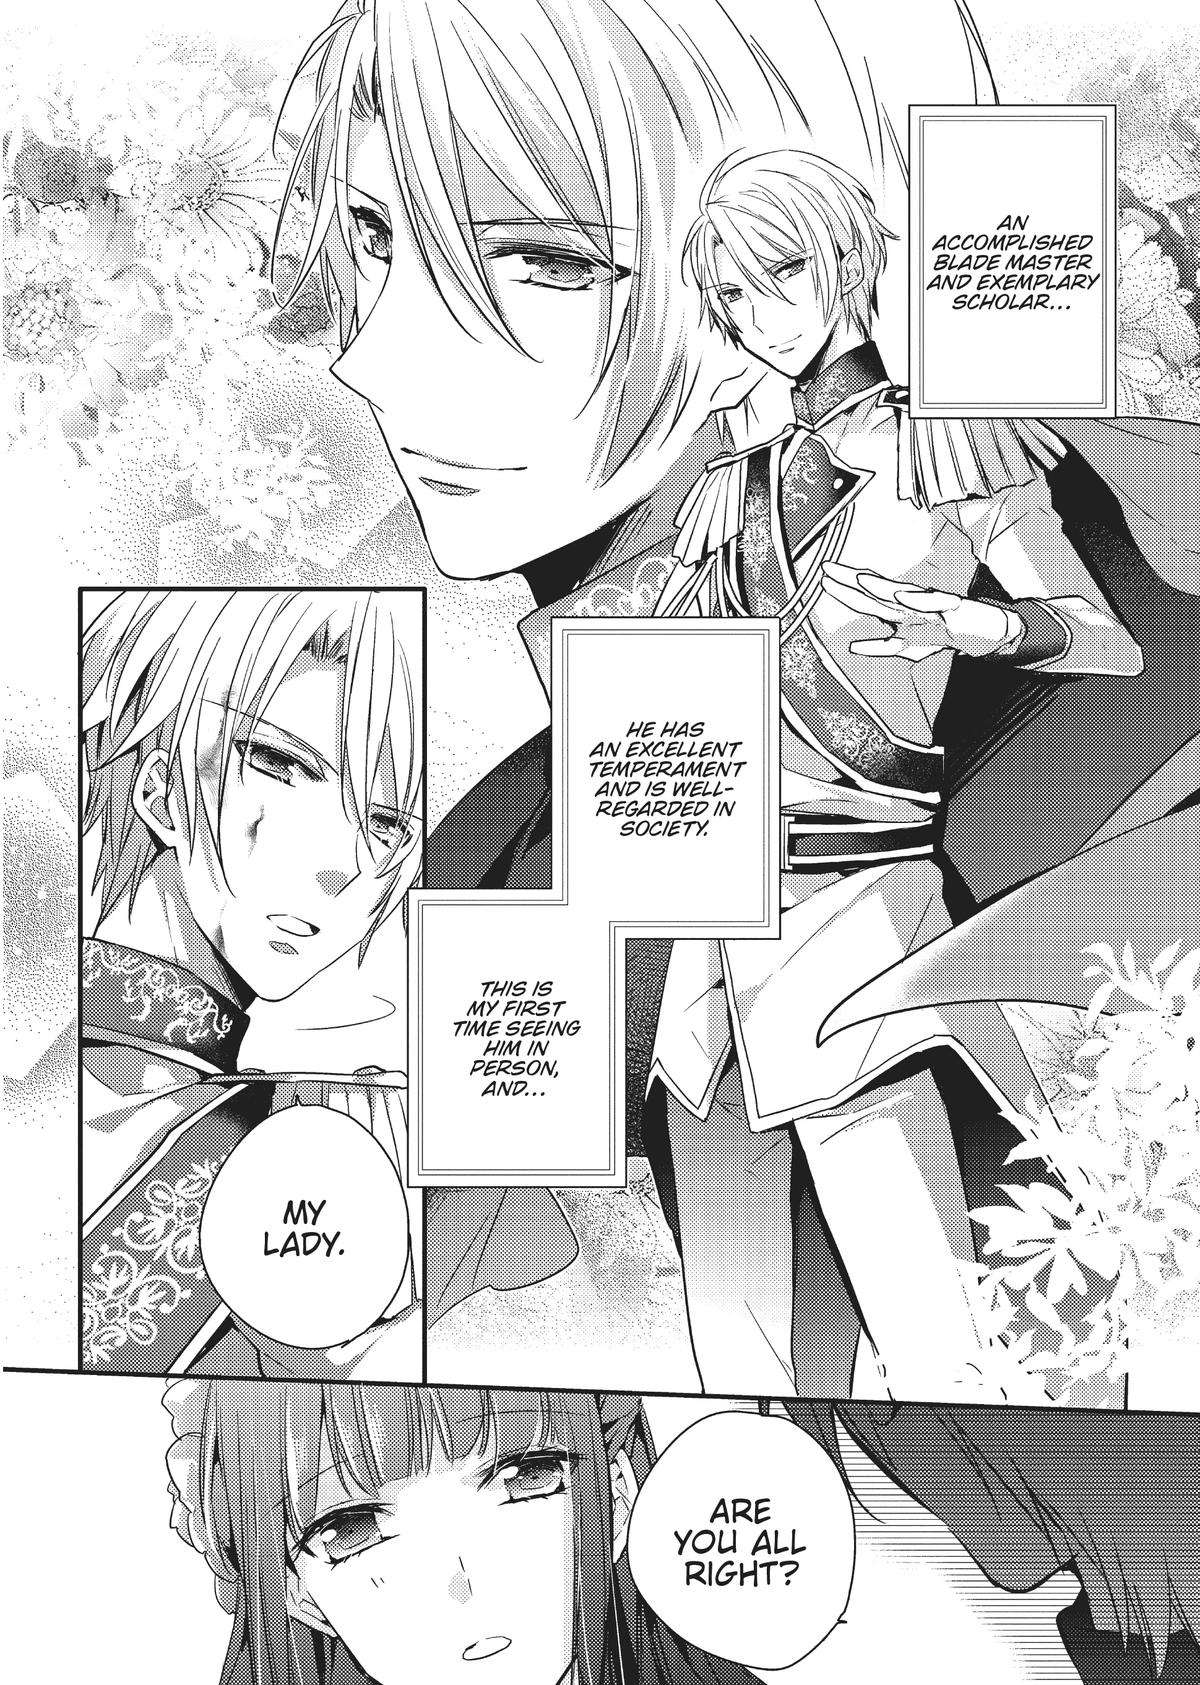 My Sister Took My Fiancé and Now I'm Being Courted by a Beastly Prince - chapter 2 - #2